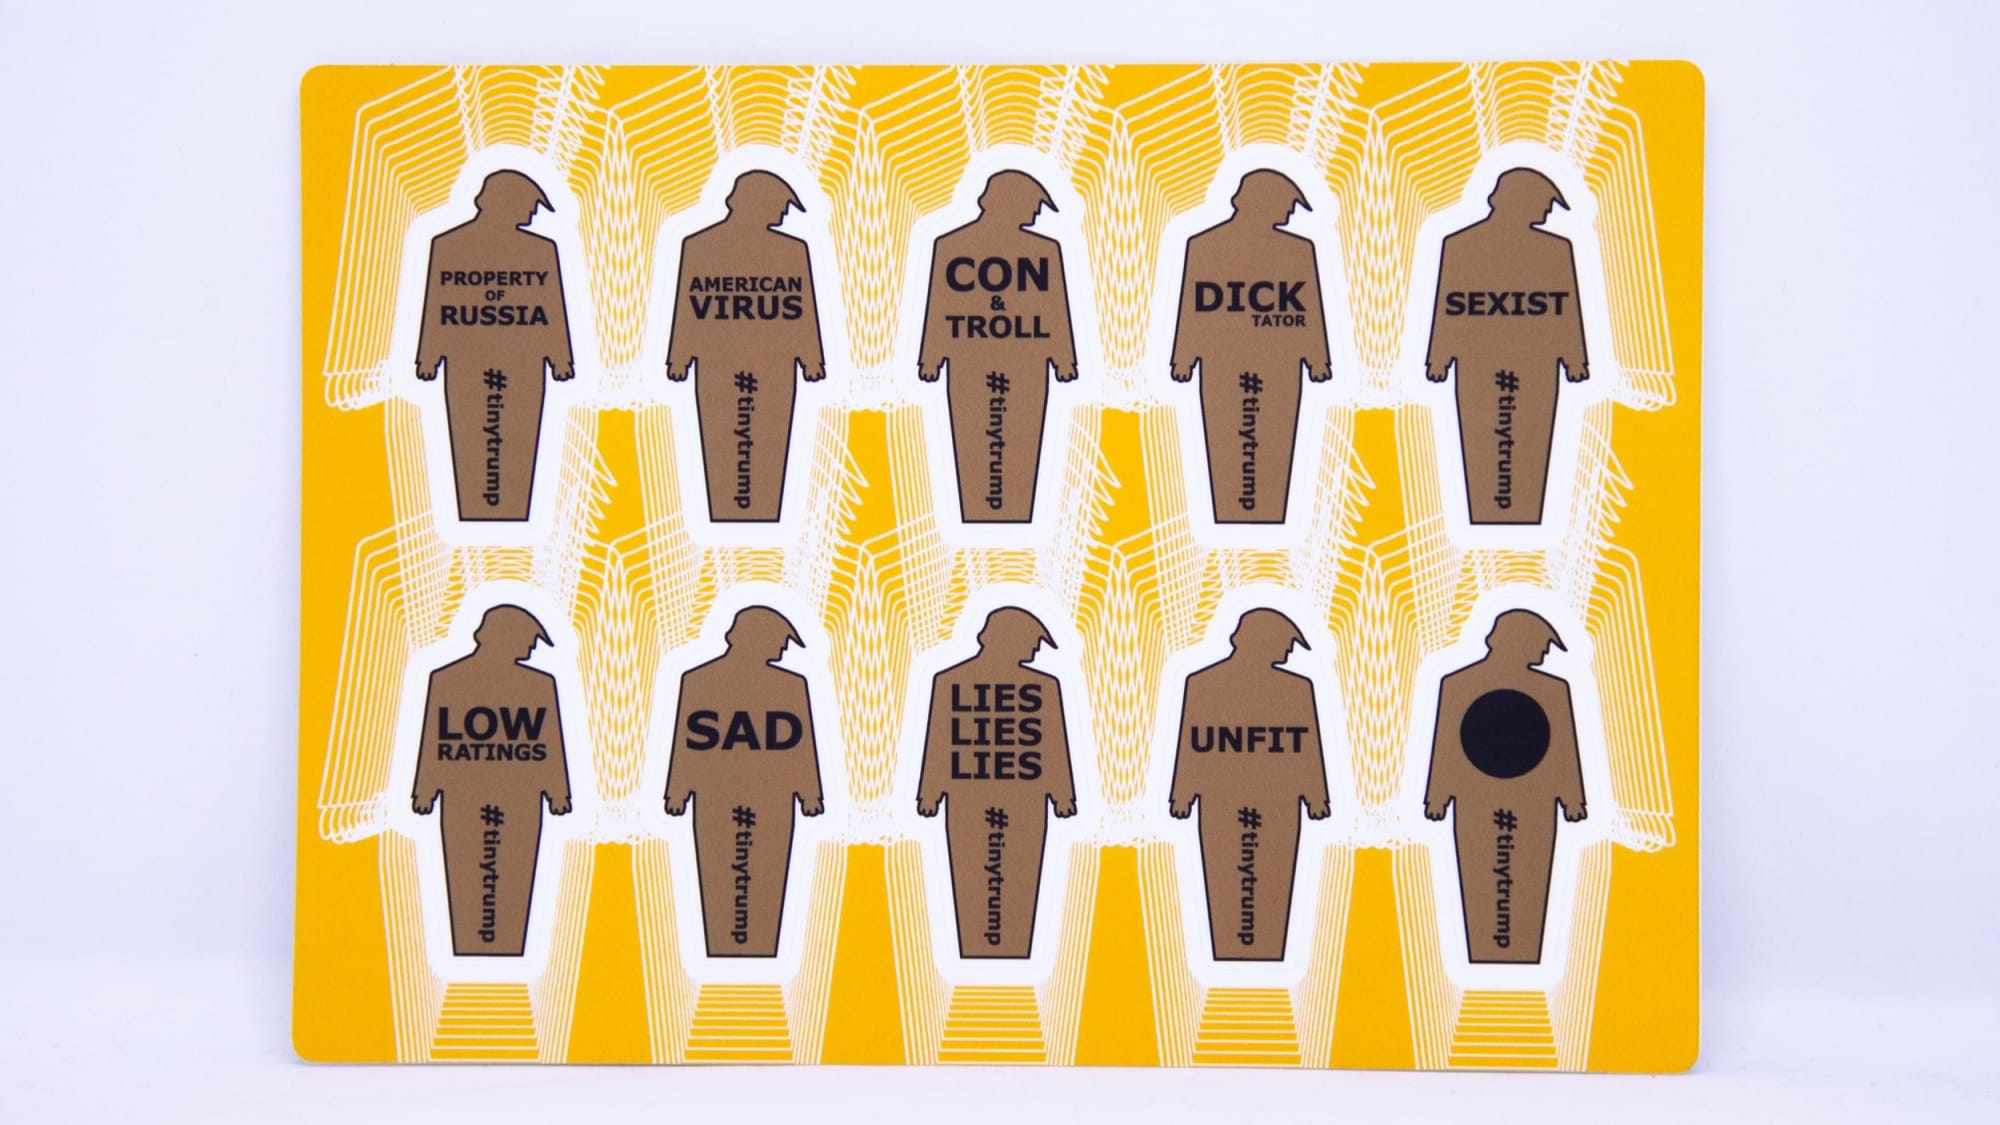 Small thumbnail image of Product photograph of a 4 inch by 6 inch sticker sheet consisting of a yellow background and 12 individual tiny trumps with the following slogans: Giant Narcissist, Enemy of the People, All money no heart, Cold as I.C.E, Racist, Fake News, Draft Dodger, Cry Baby, Epic Failure, Impeached